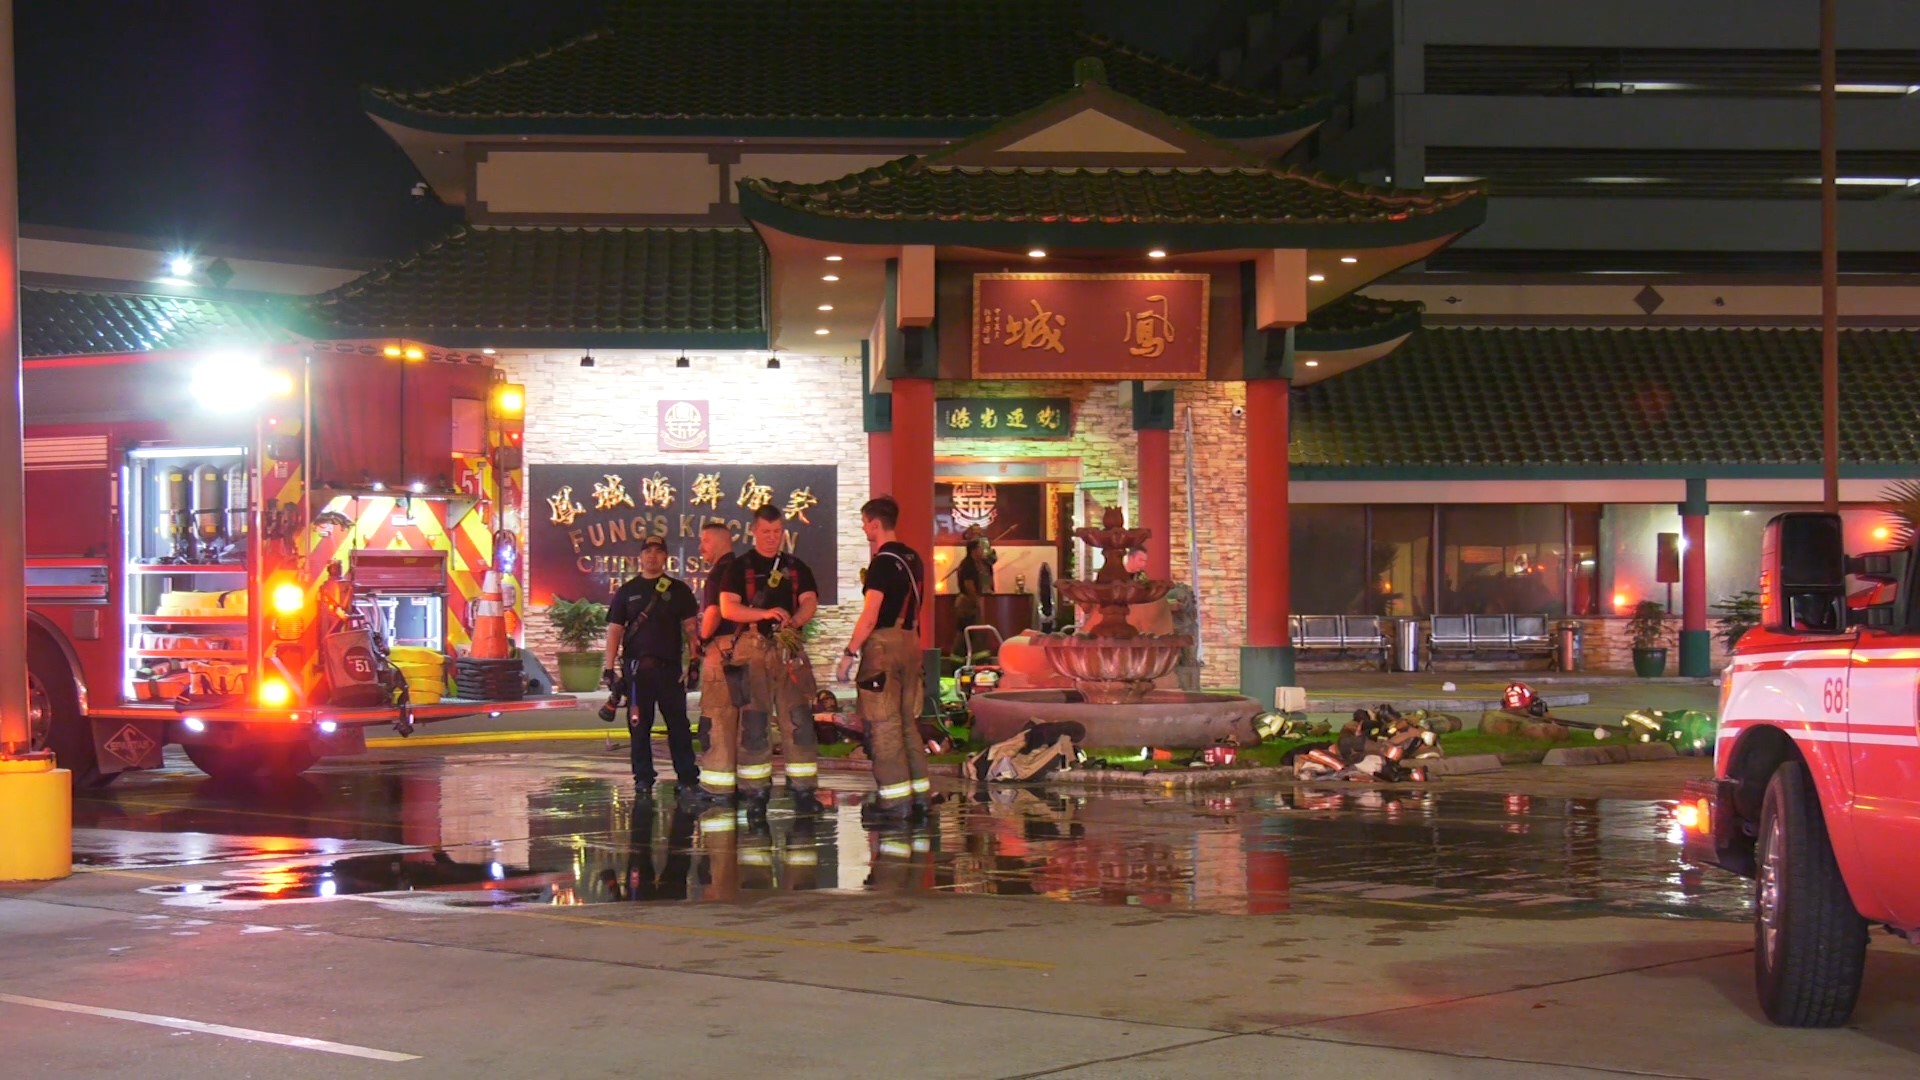 The fire was reported late Sunday night at Fung’s Kitchen along the Southwest Freeway.